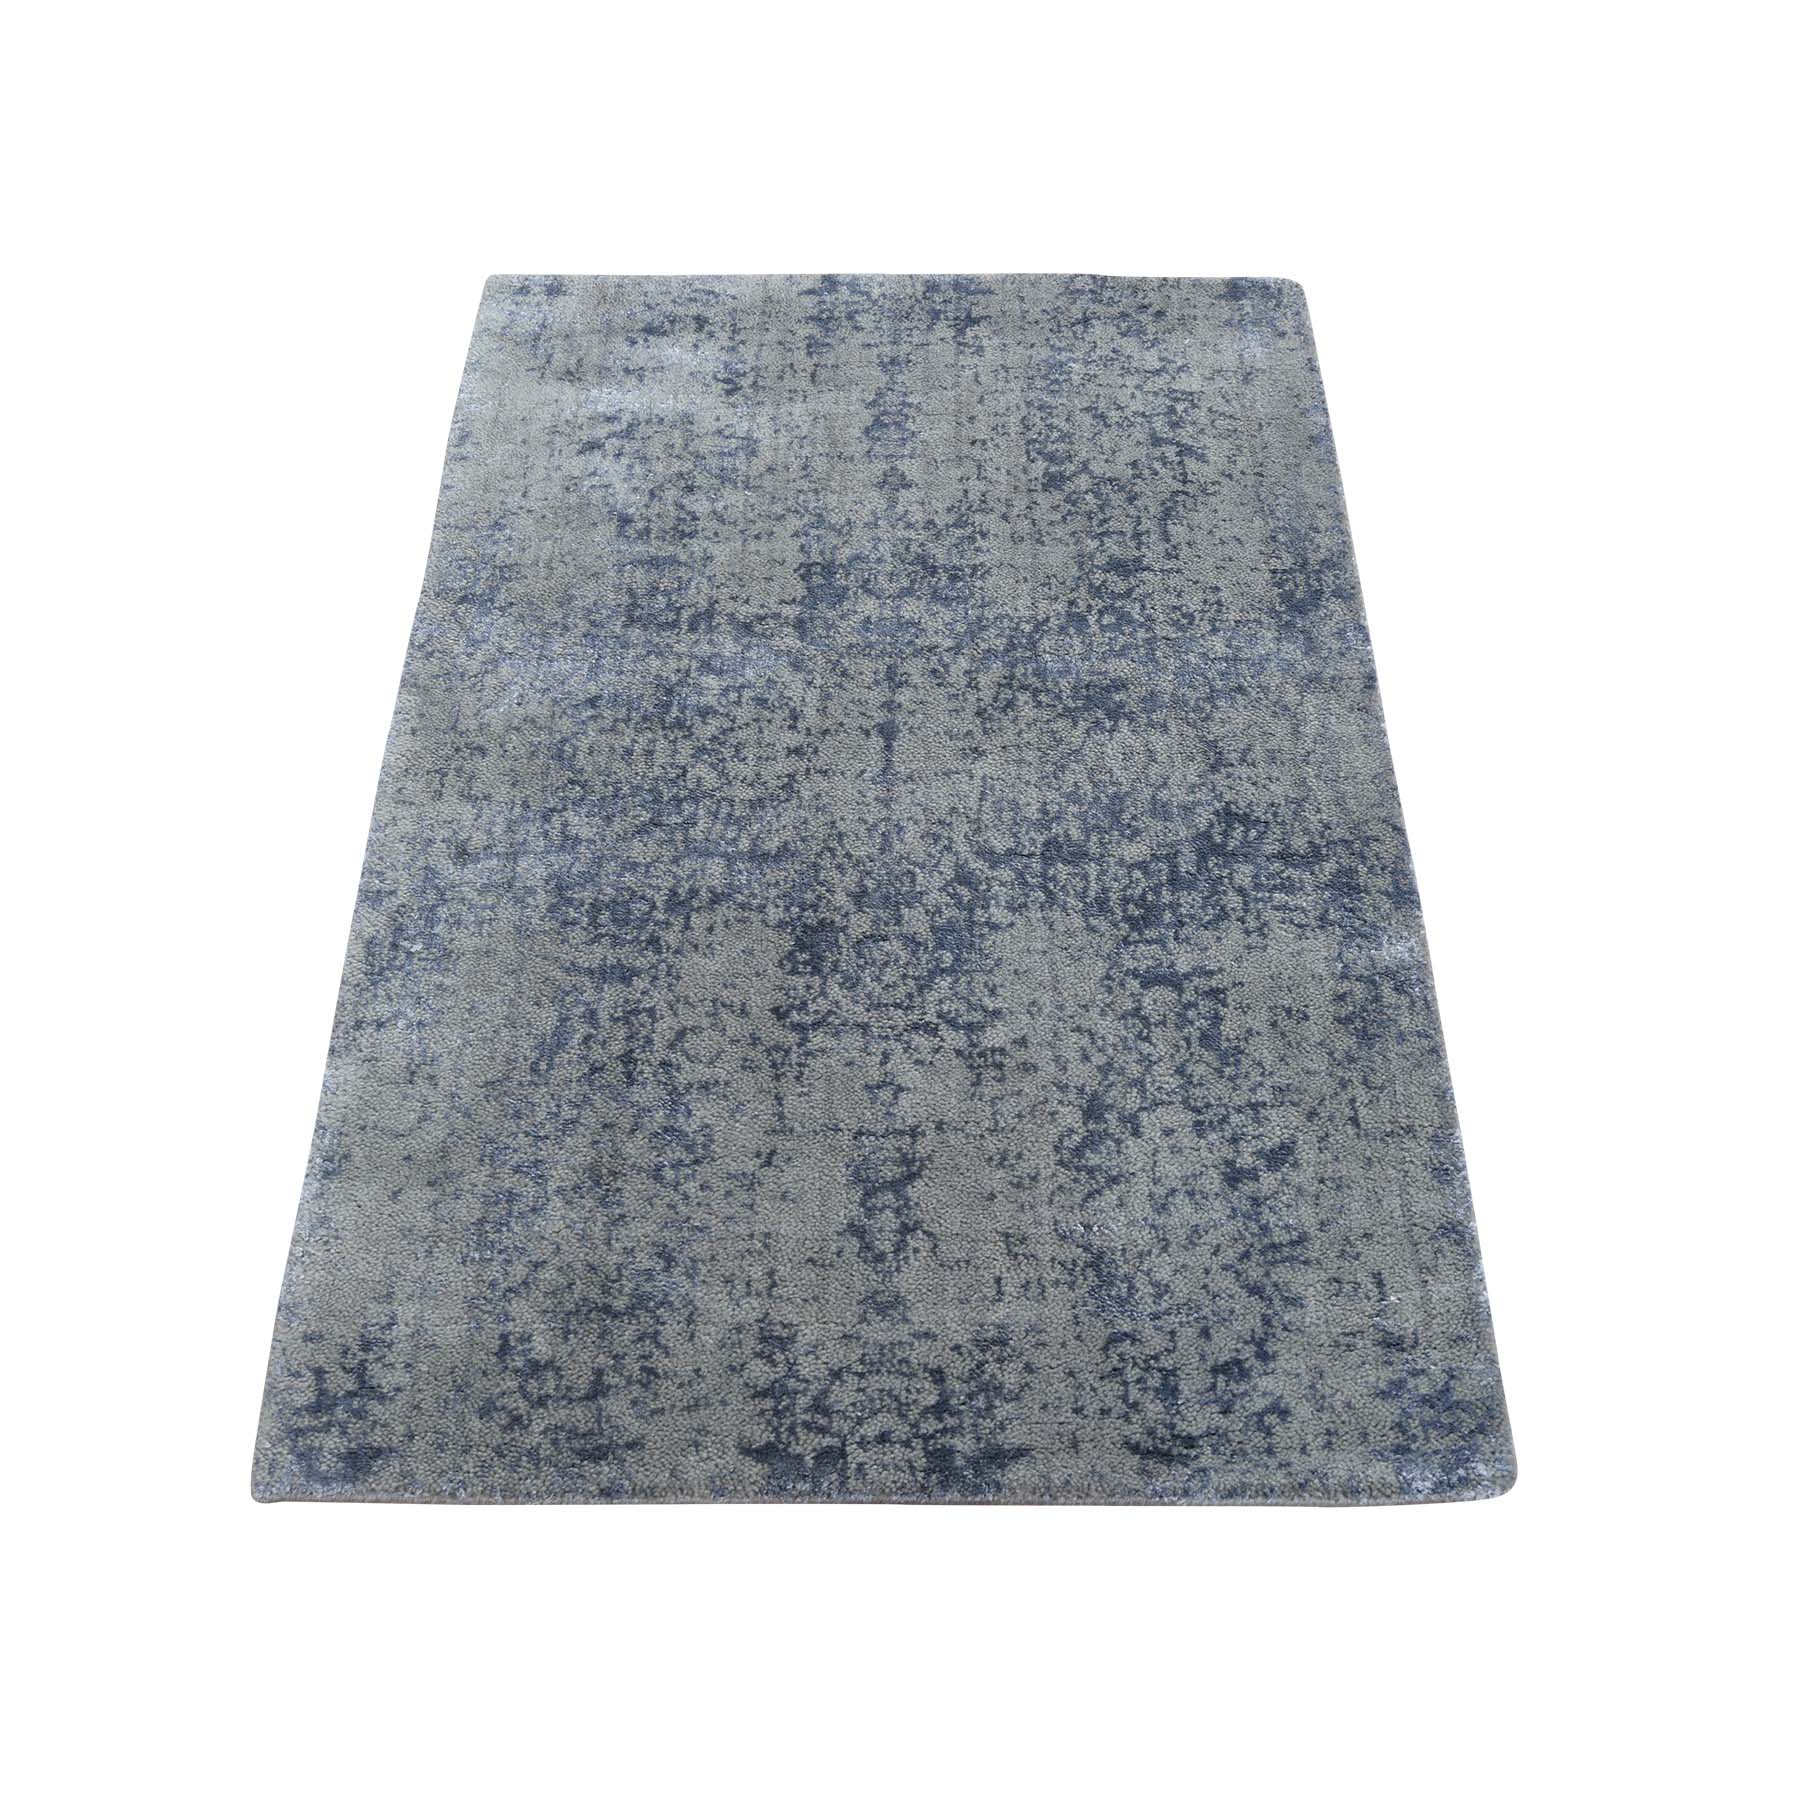 2'x3' Wool and Silk Hand-Loomed Abstract Design Tone on Tone Oriental Rug 